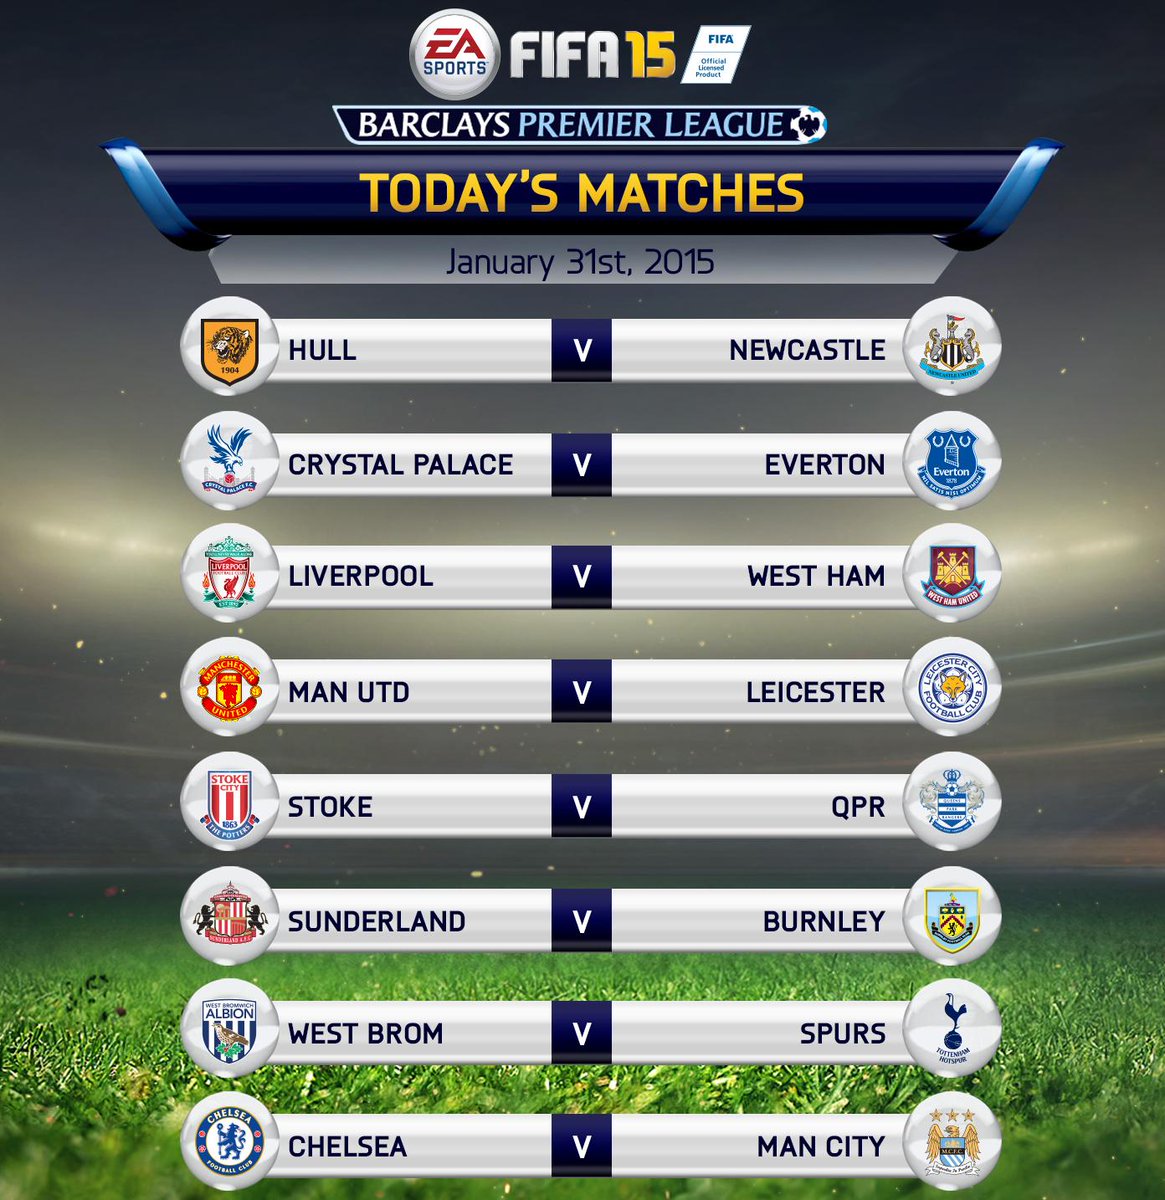 Eight premierleague matches coming up! Who are you supporting? BPL Football Fixtures - EA SPORTS FIFA - Scoopnest